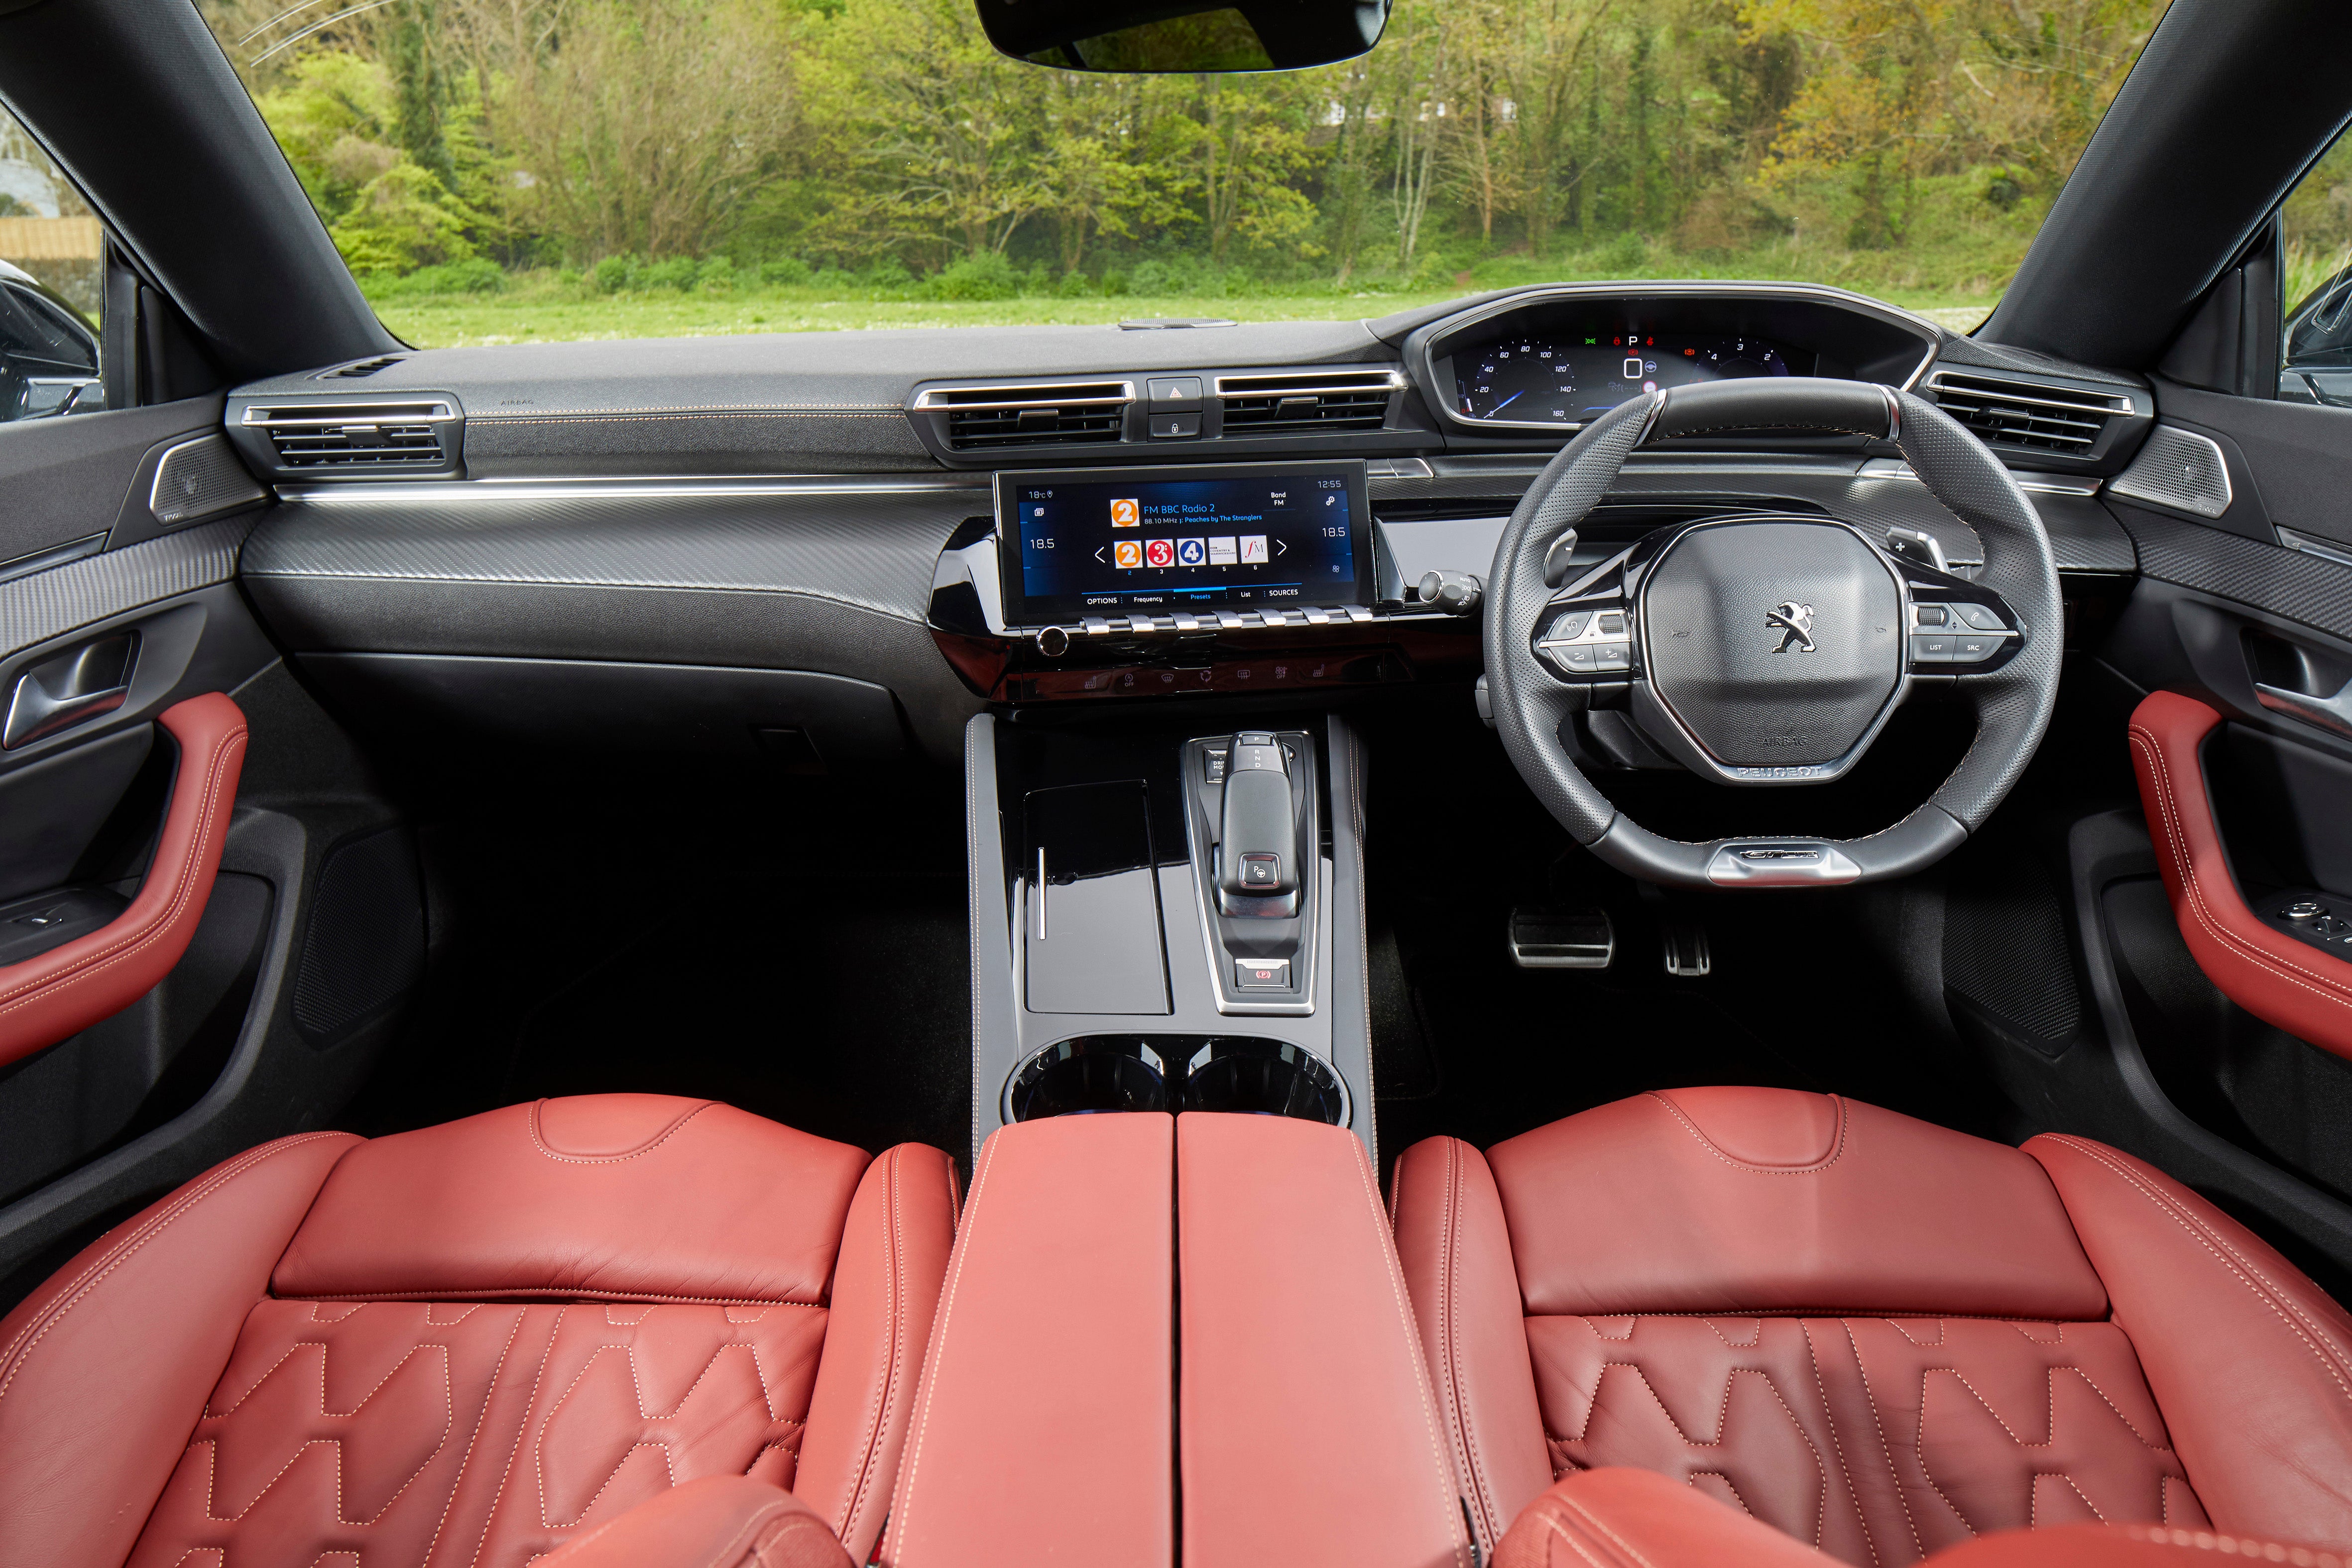 Peugeot 508 Review 2022: interior front seats